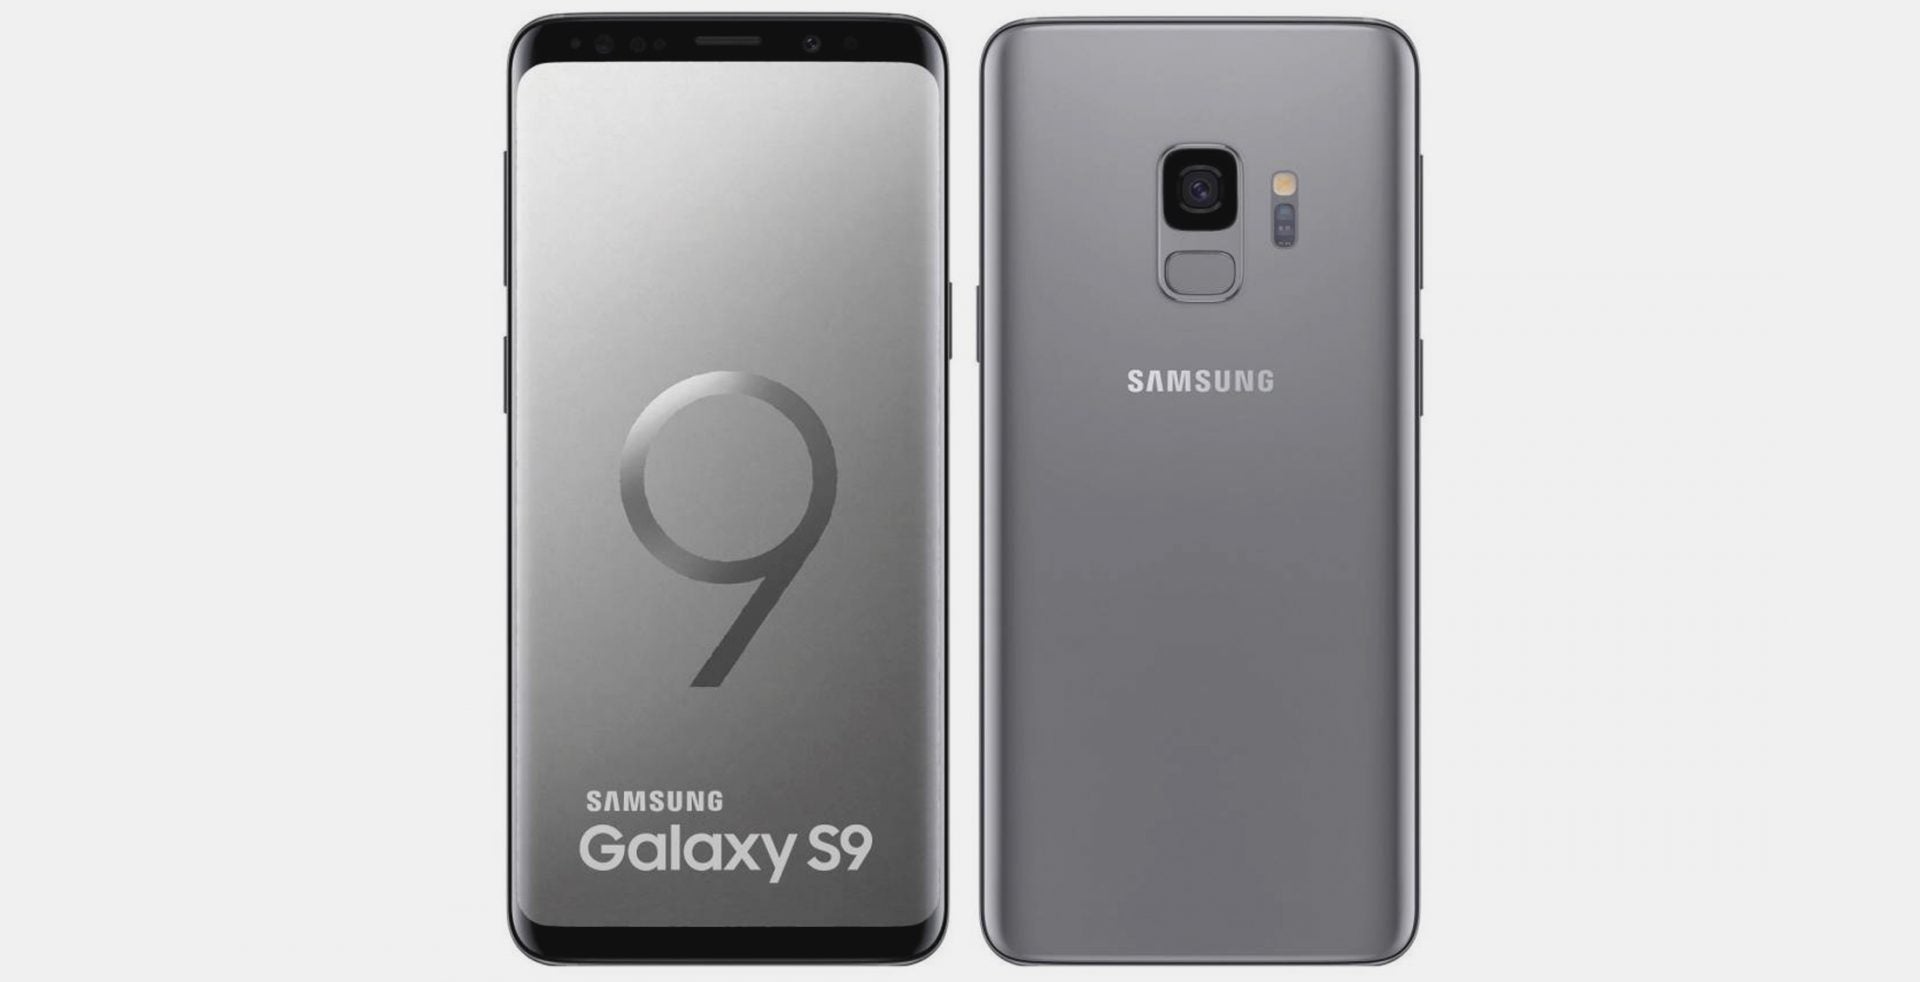 Samsung Galaxy S9 Titanium Grey variant launches in the UK today